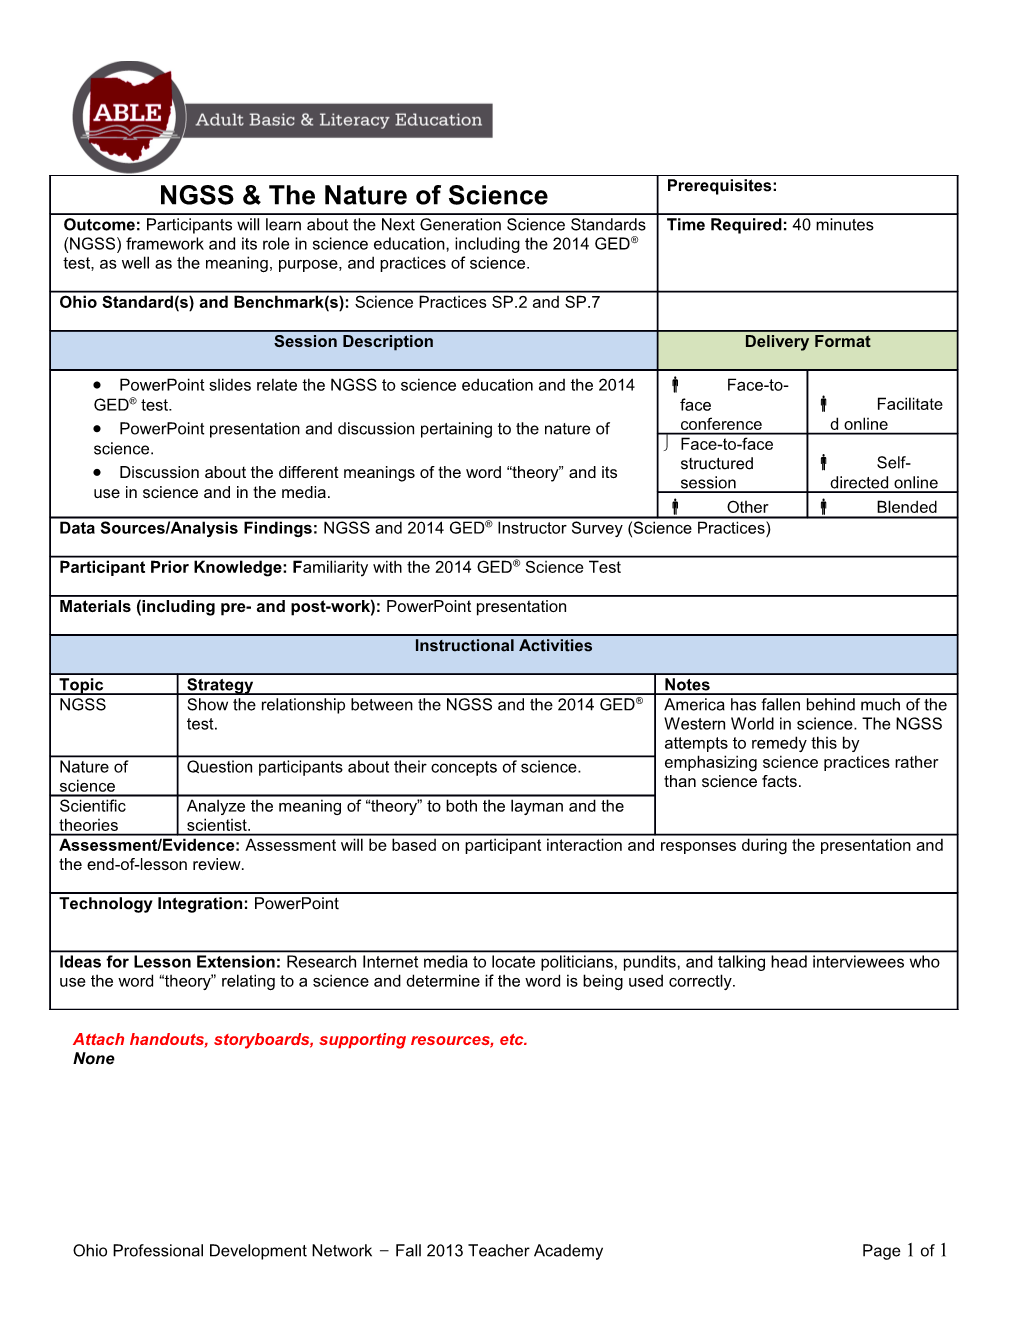 NGSS & the Nature of Science